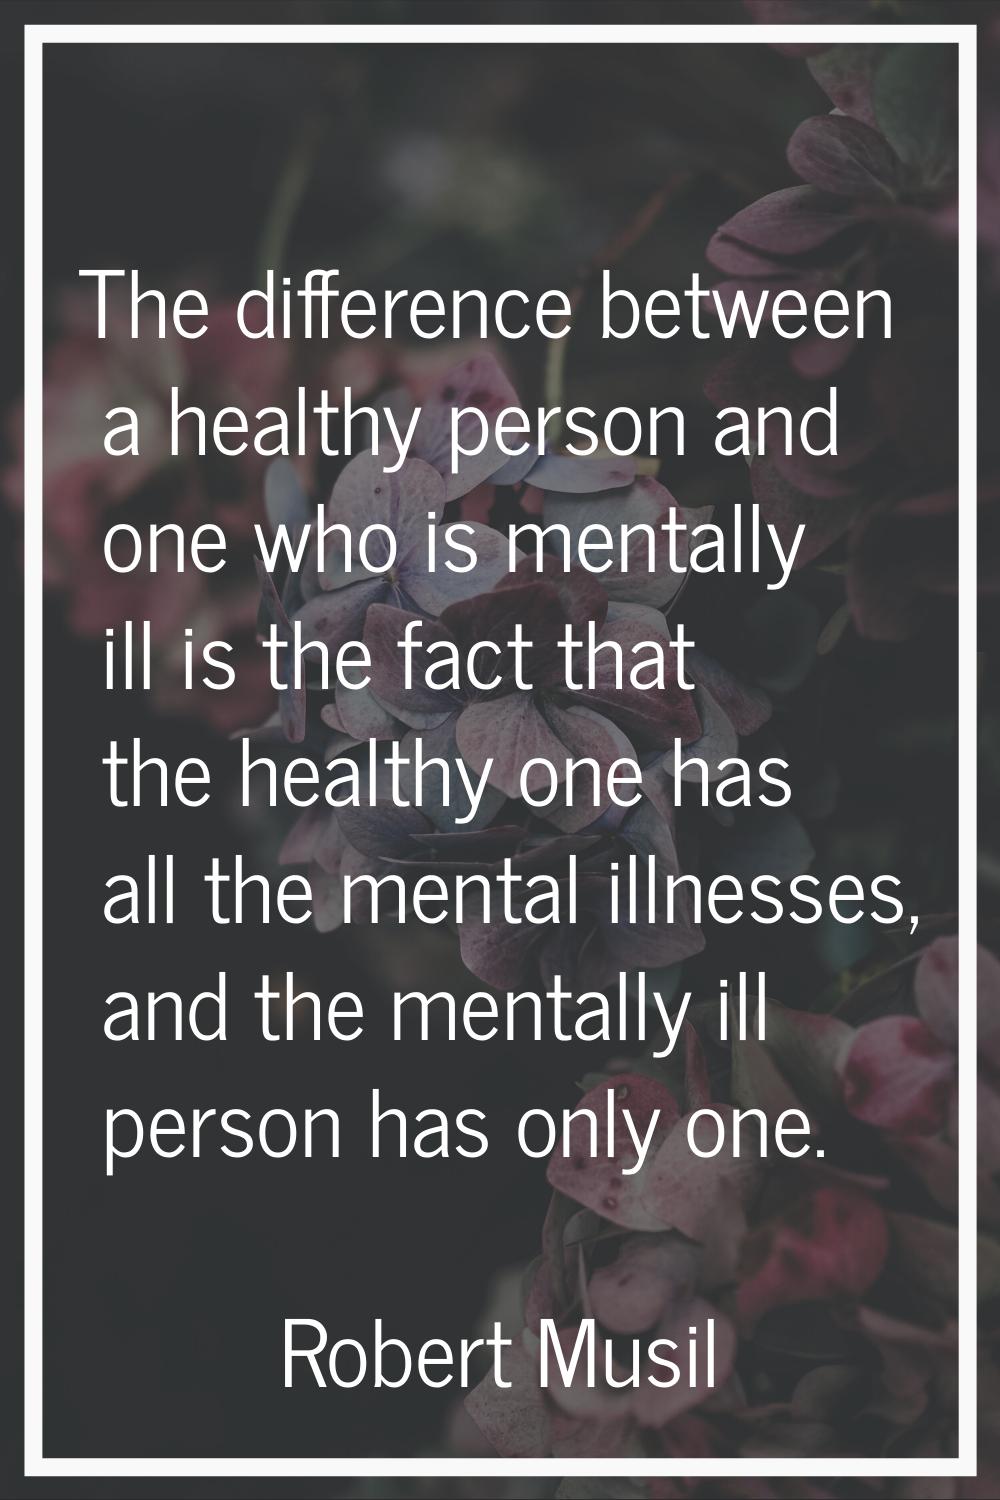 The difference between a healthy person and one who is mentally ill is the fact that the healthy on